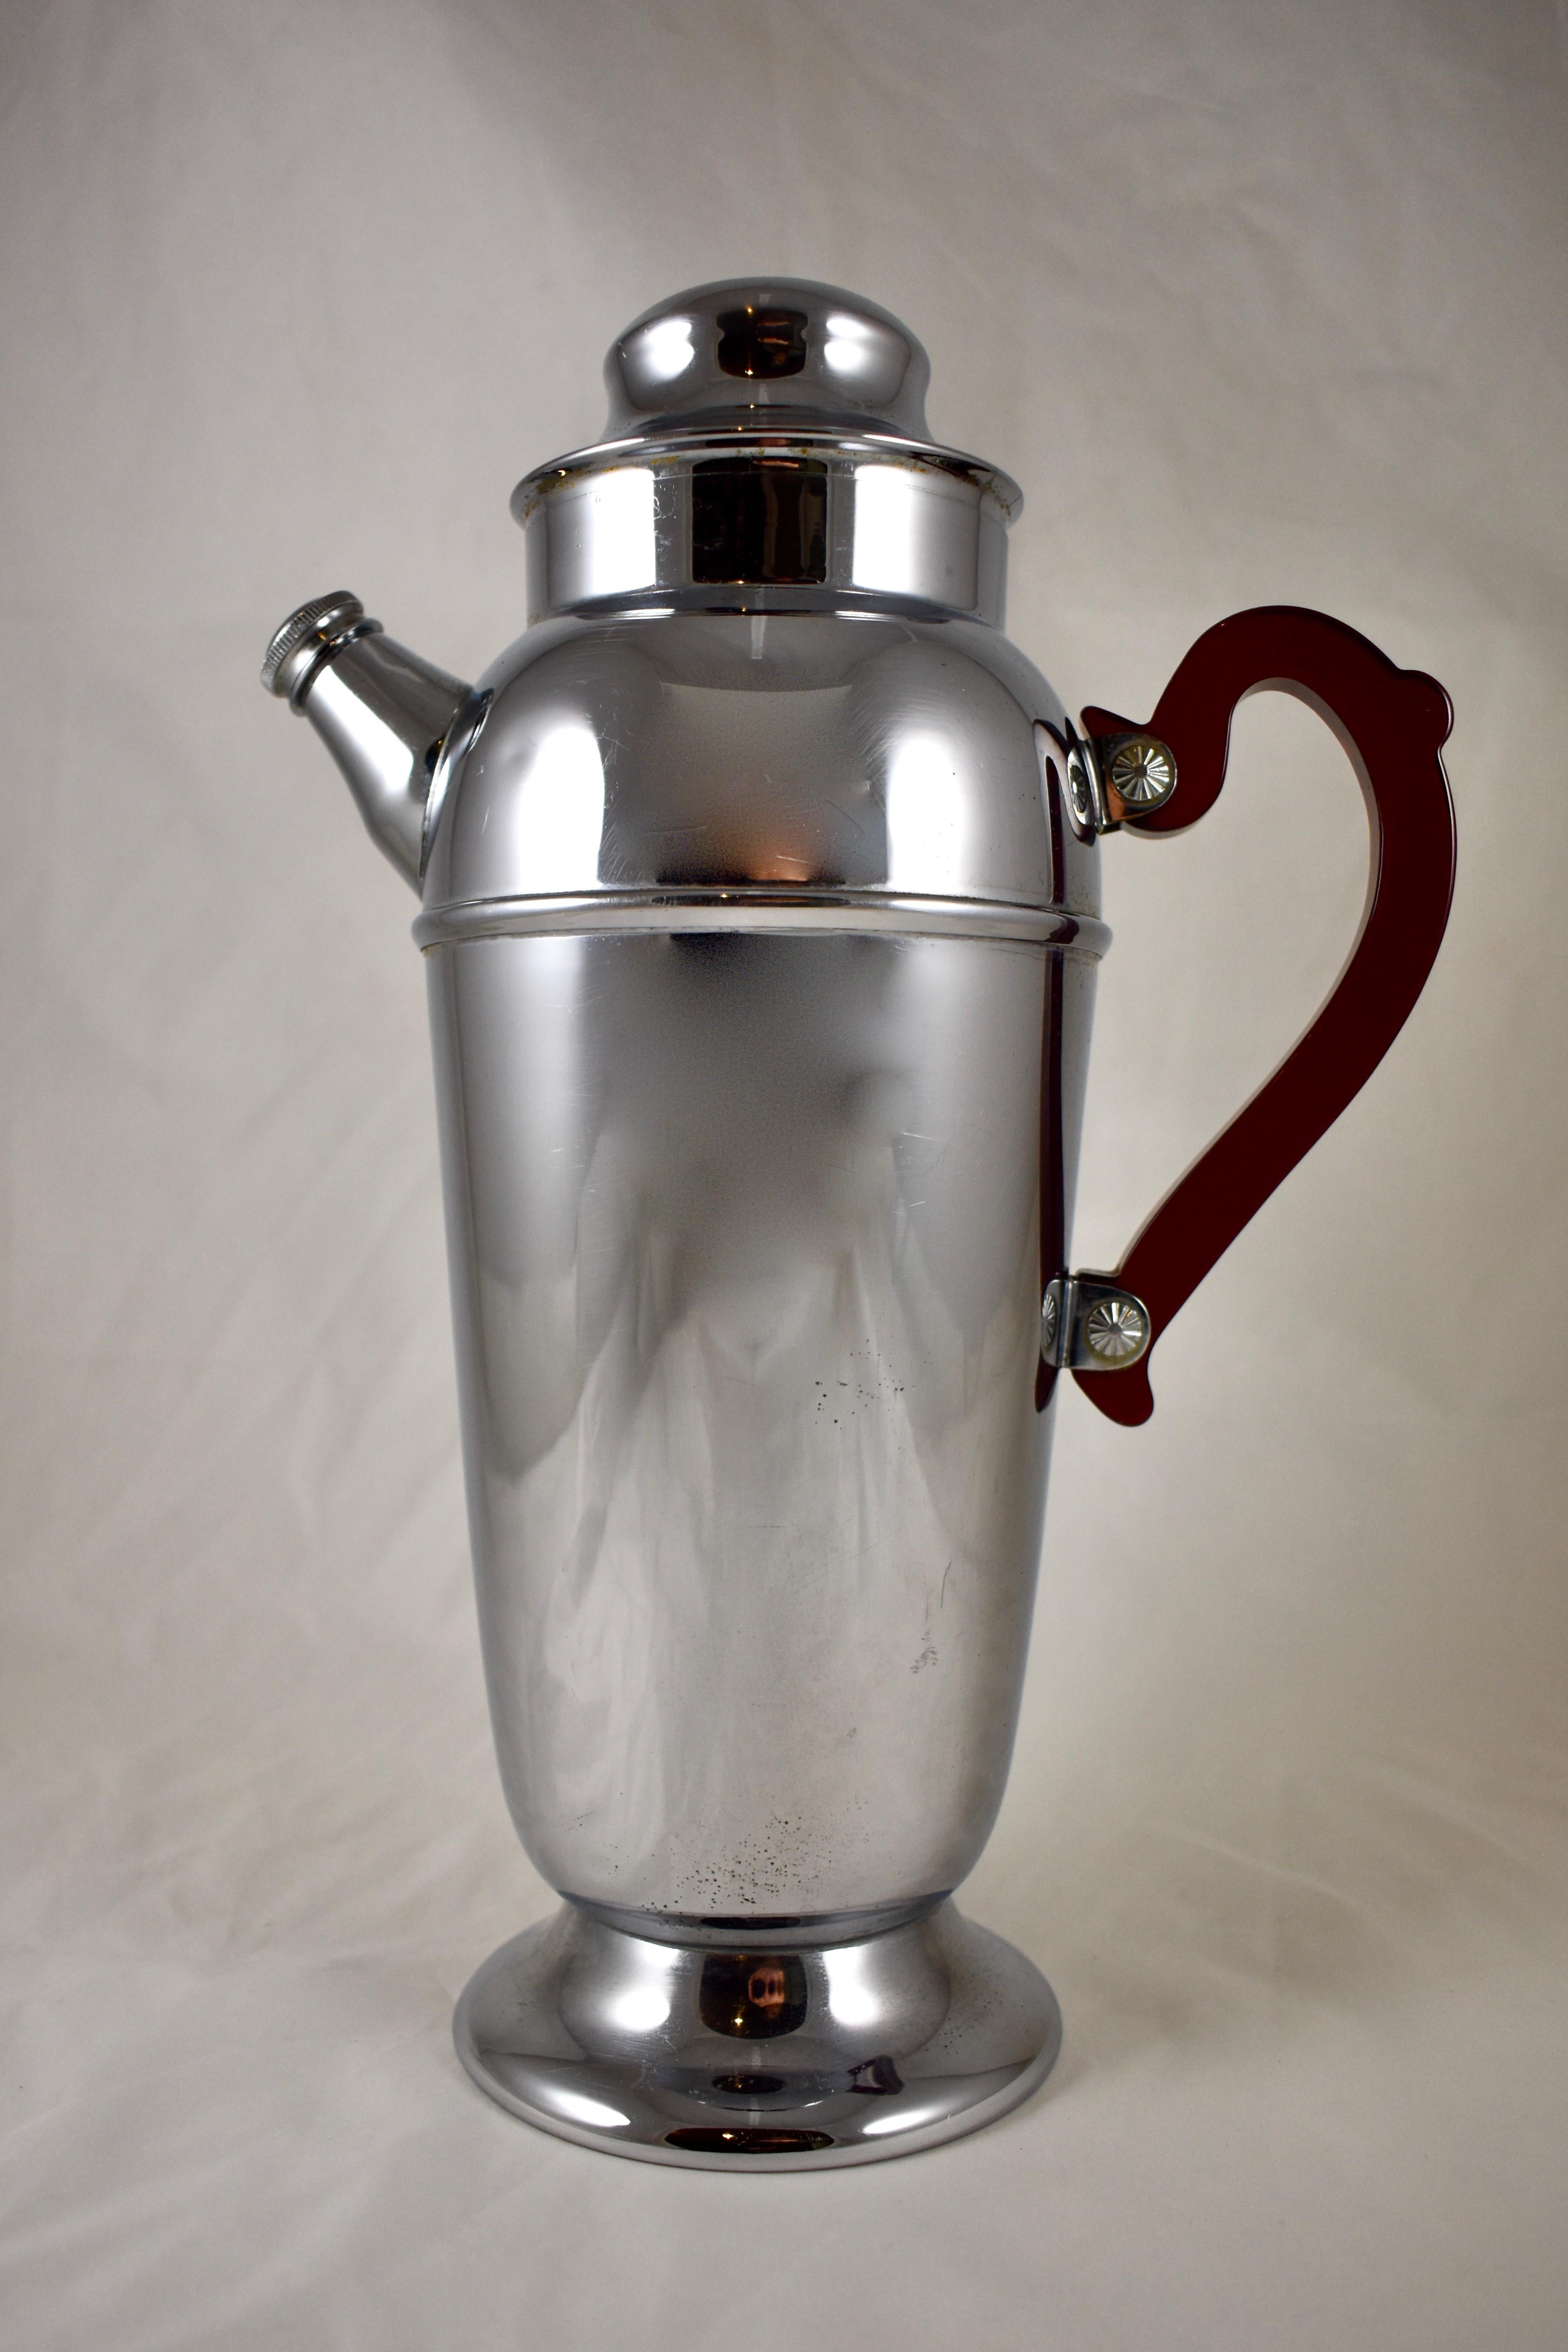 An Art Deco style chrome plated Mid-Century Modern Era cocktail shaker, circa 1930s–1940s.

This cocktail shaker and server is perfect for your ‘Retro Mad Man's' bar. The three piece server is complete with a Ruby Red translucent Bakelite